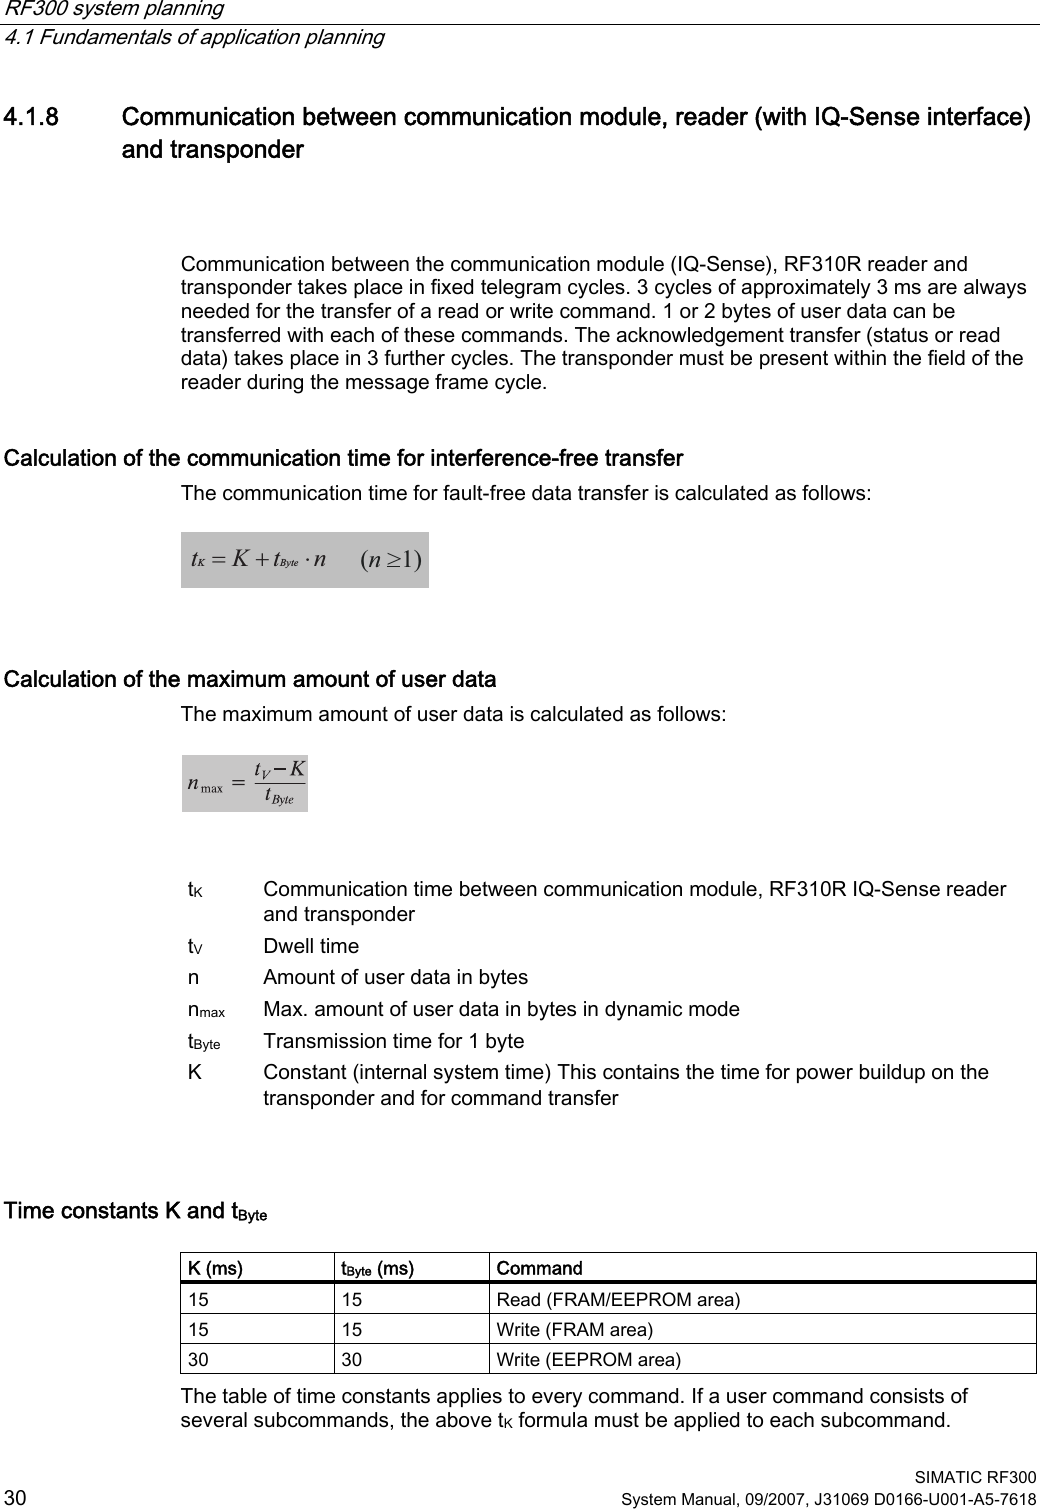 RF300 system planning   4.1 Fundamentals of application planning  SIMATIC RF300 30 System Manual, 09/2007, J31069 D0166-U001-A5-7618 4.1.8 Communication between communication module, reader (with IQ-Sense interface) and transponder  Communication between the communication module (IQ-Sense), RF310R reader and transponder takes place in fixed telegram cycles. 3 cycles of approximately 3 ms are always needed for the transfer of a read or write command. 1 or 2 bytes of user data can be transferred with each of these commands. The acknowledgement transfer (status or read data) takes place in 3 further cycles. The transponder must be present within the field of the reader during the message frame cycle. Calculation of the communication time for interference-free transfer The communication time for fault-free data transfer is calculated as follows:  =+ ⋅tKtnKByte(n &gt;1)  Calculation of the maximum amount of user data The maximum amount of user data is calculated as follows:     tK  Communication time between communication module, RF310R IQ-Sense reader and transponder tV  Dwell time  n  Amount of user data in bytes nmax  Max. amount of user data in bytes in dynamic mode tByte  Transmission time for 1 byte K  Constant (internal system time) This contains the time for power buildup on the transponder and for command transfer  Time constants K and tByte  K (ms)  tByte (ms)  Command 15  15  Read (FRAM/EEPROM area) 15  15  Write (FRAM area) 30  30  Write (EEPROM area) The table of time constants applies to every command. If a user command consists of several subcommands, the above tK formula must be applied to each subcommand. 